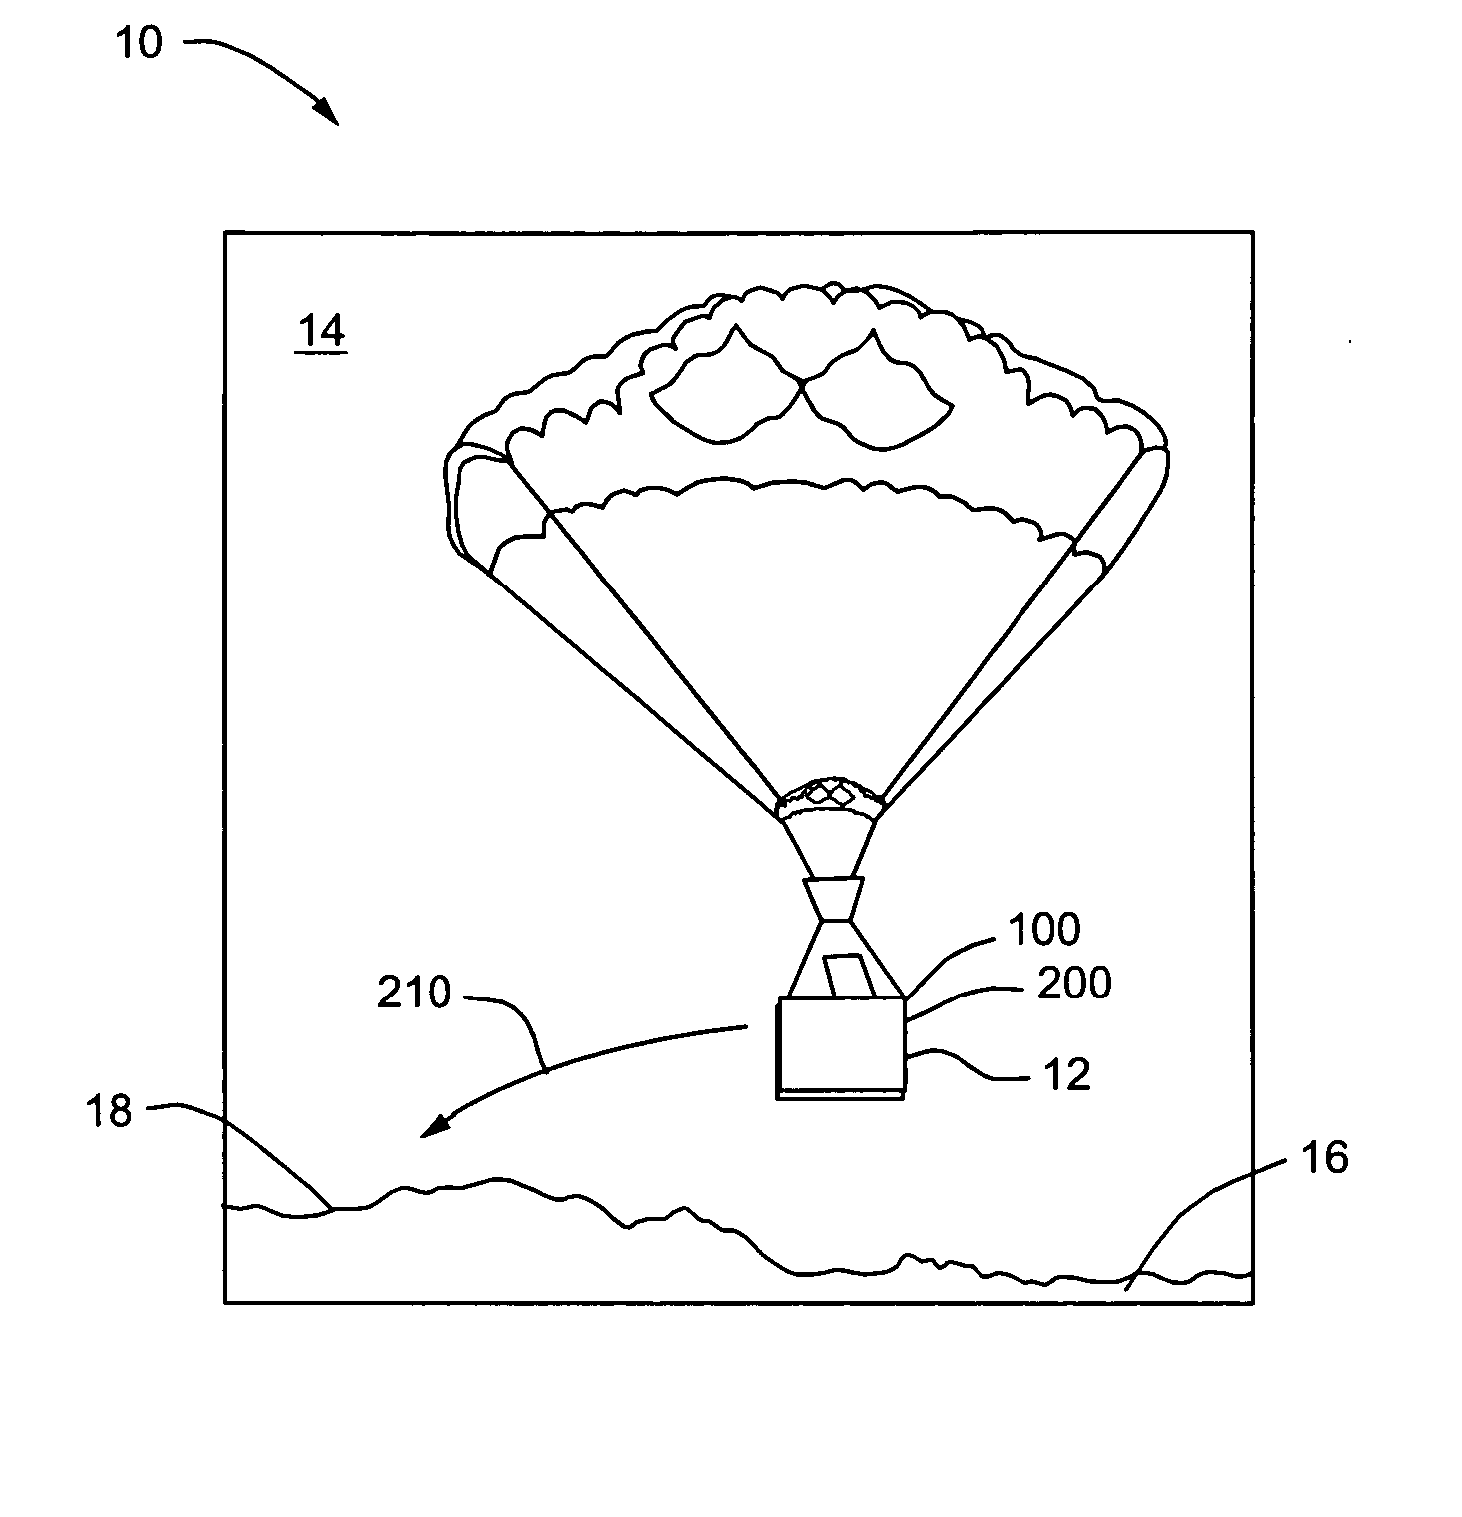 Method and apparatuses for controlling high wing loaded parafoils